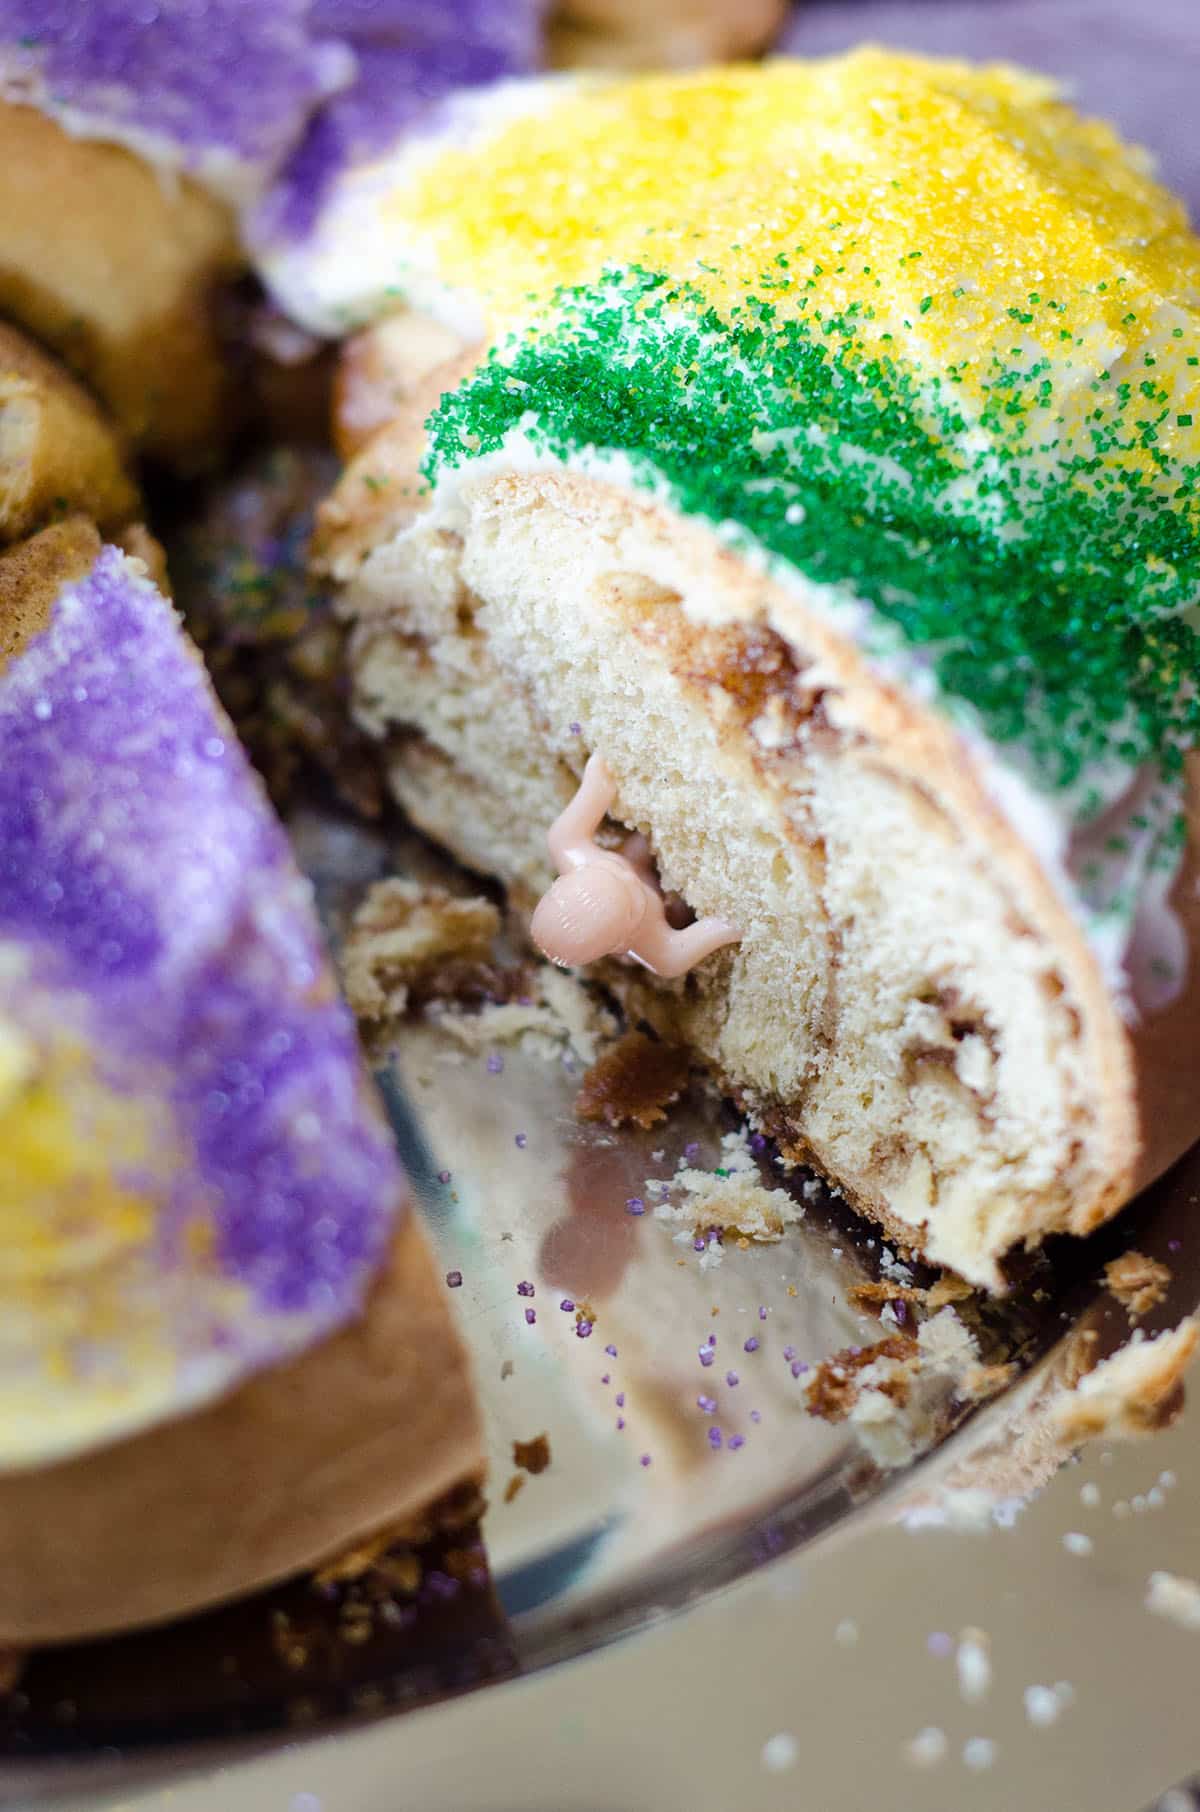 sliced mardi gras cake with a baby sticking out of it